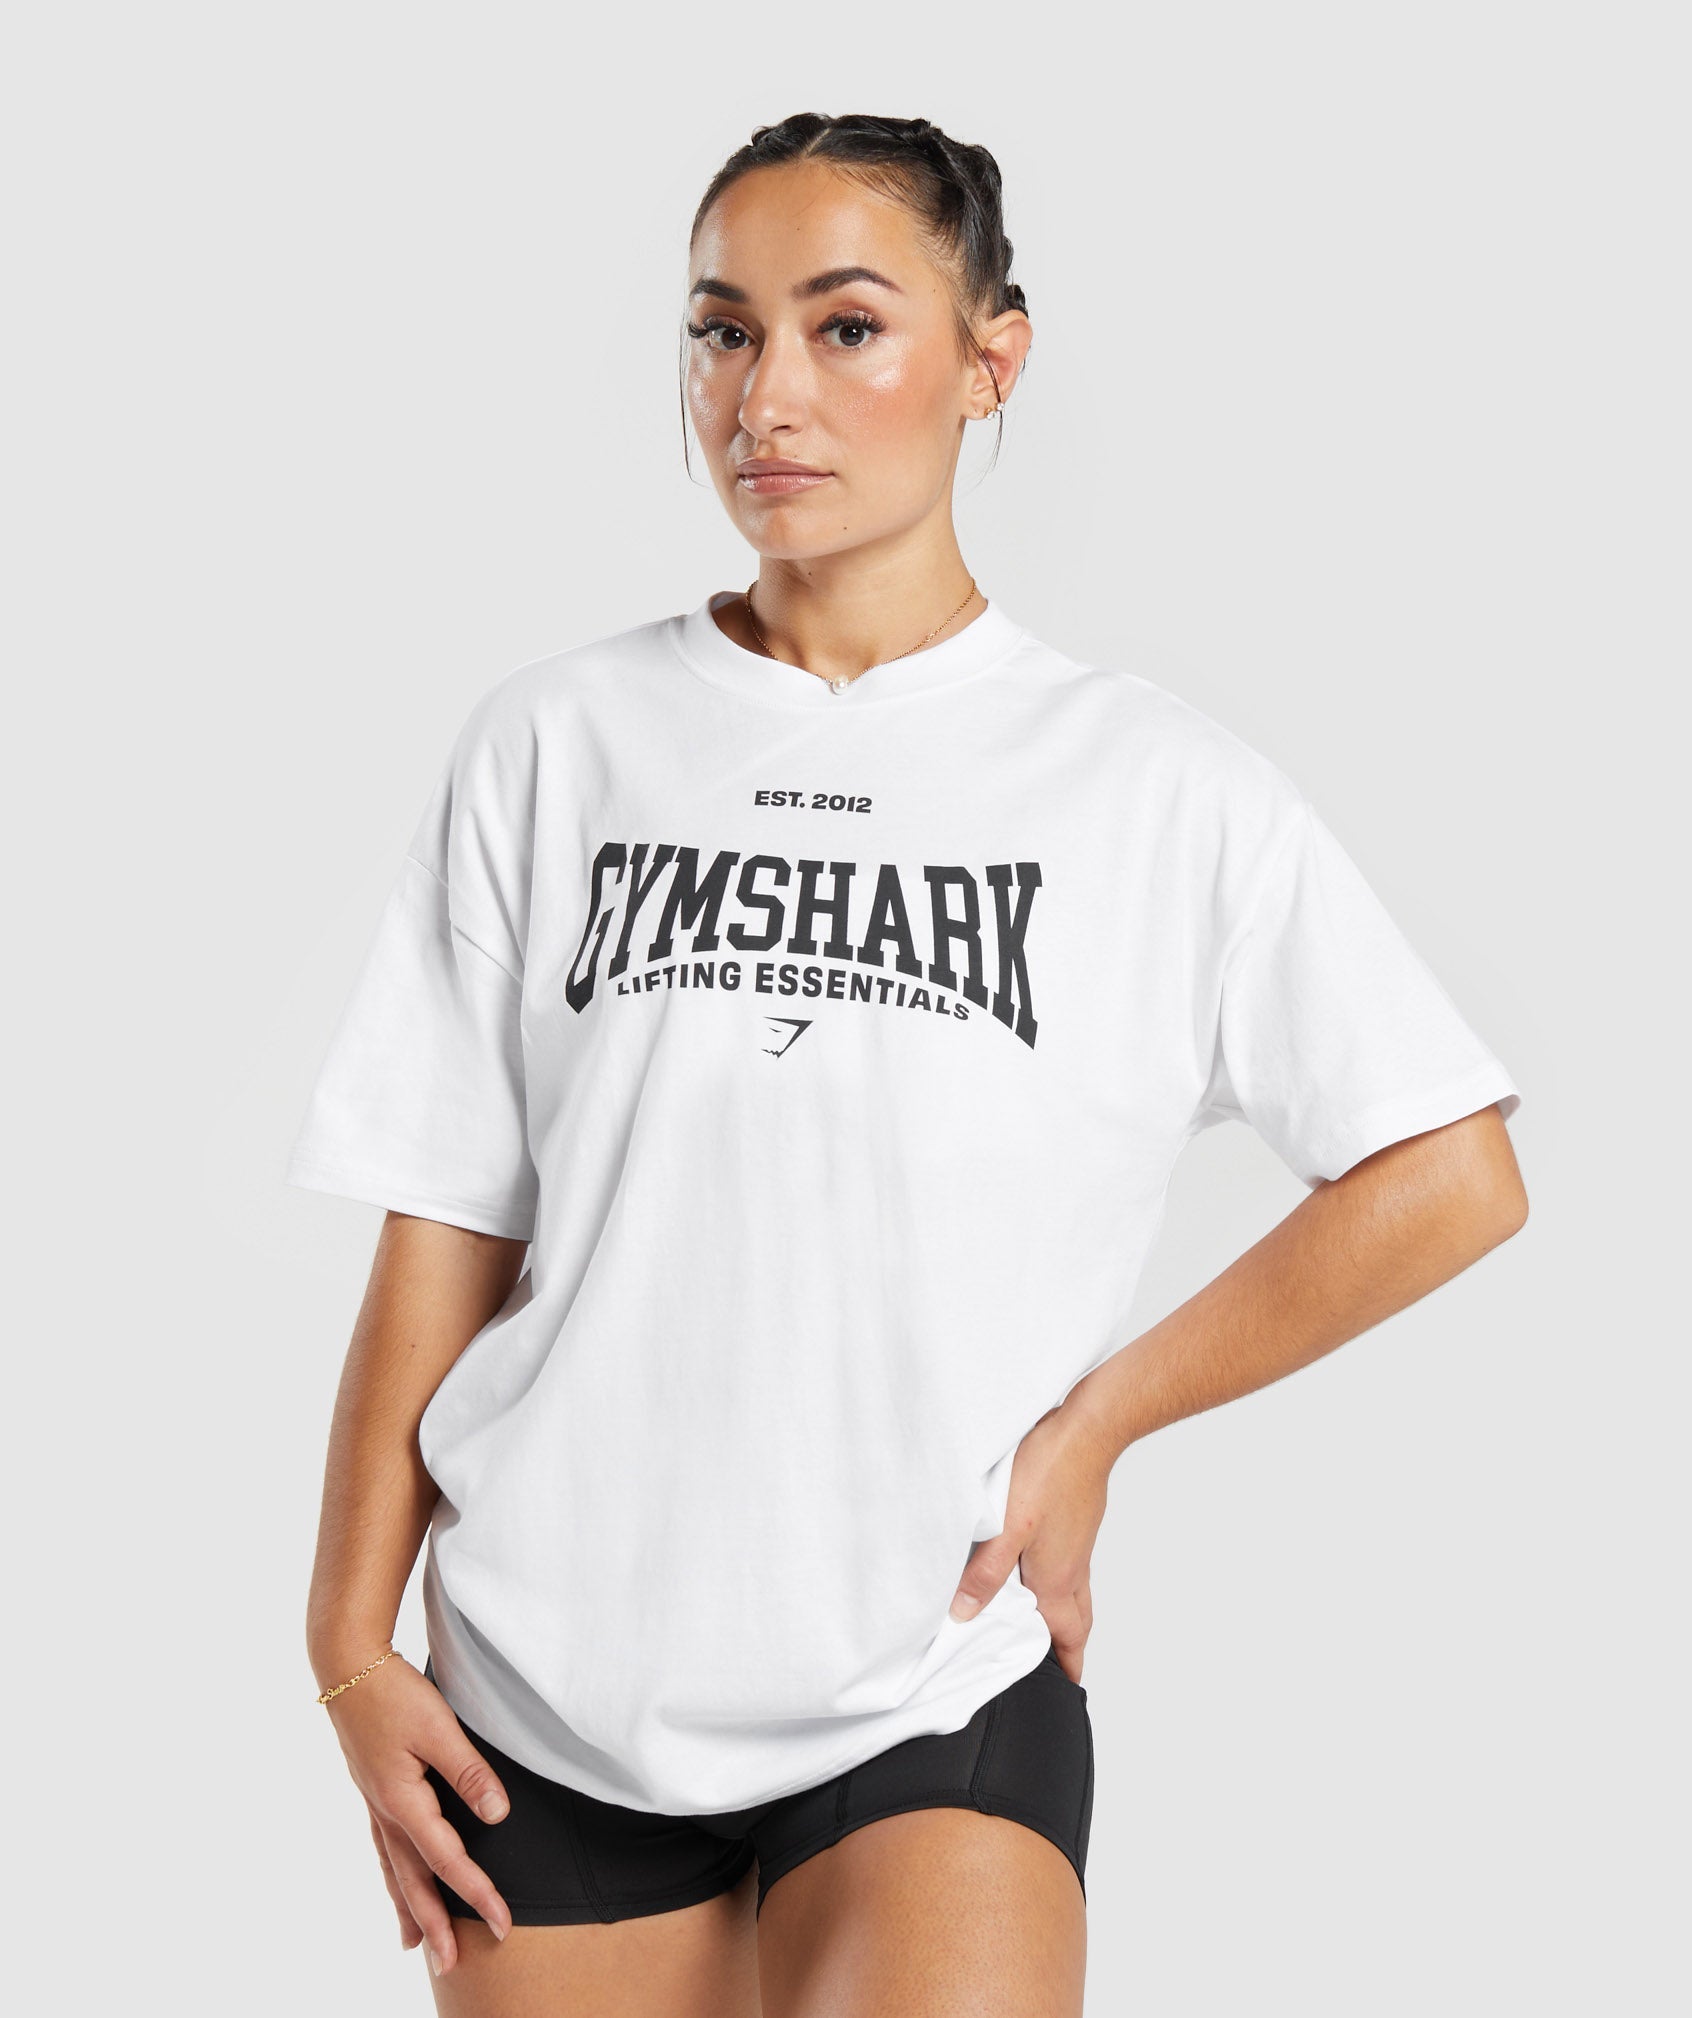 Lifting Essentials Oversized T-shirt in White - view 1